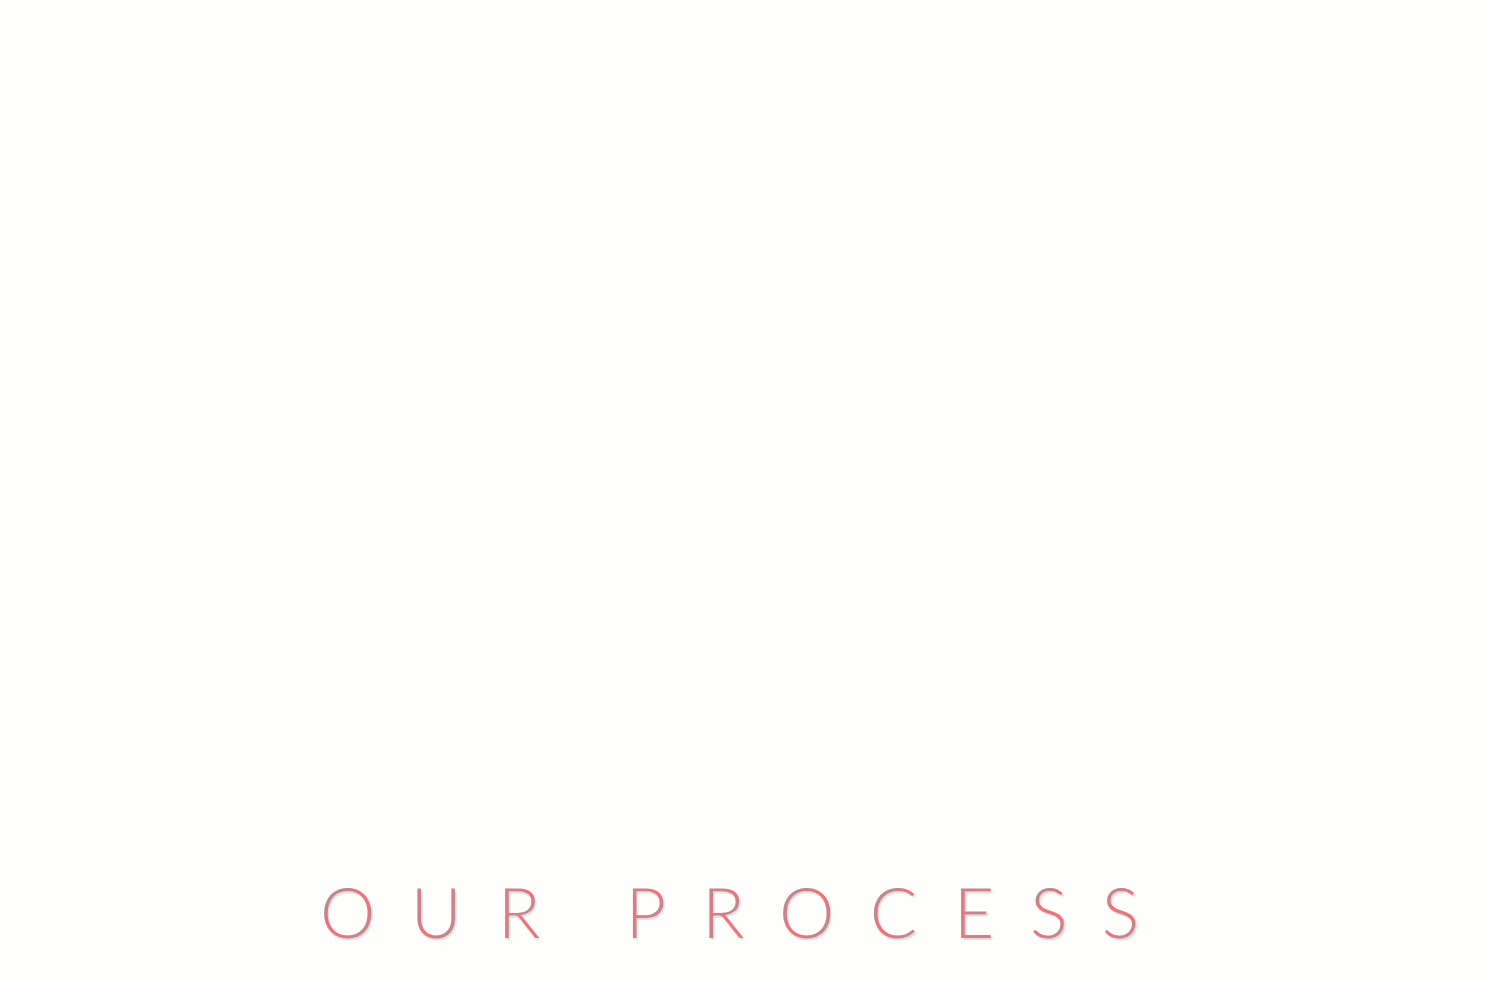 steps to a process scroll effects